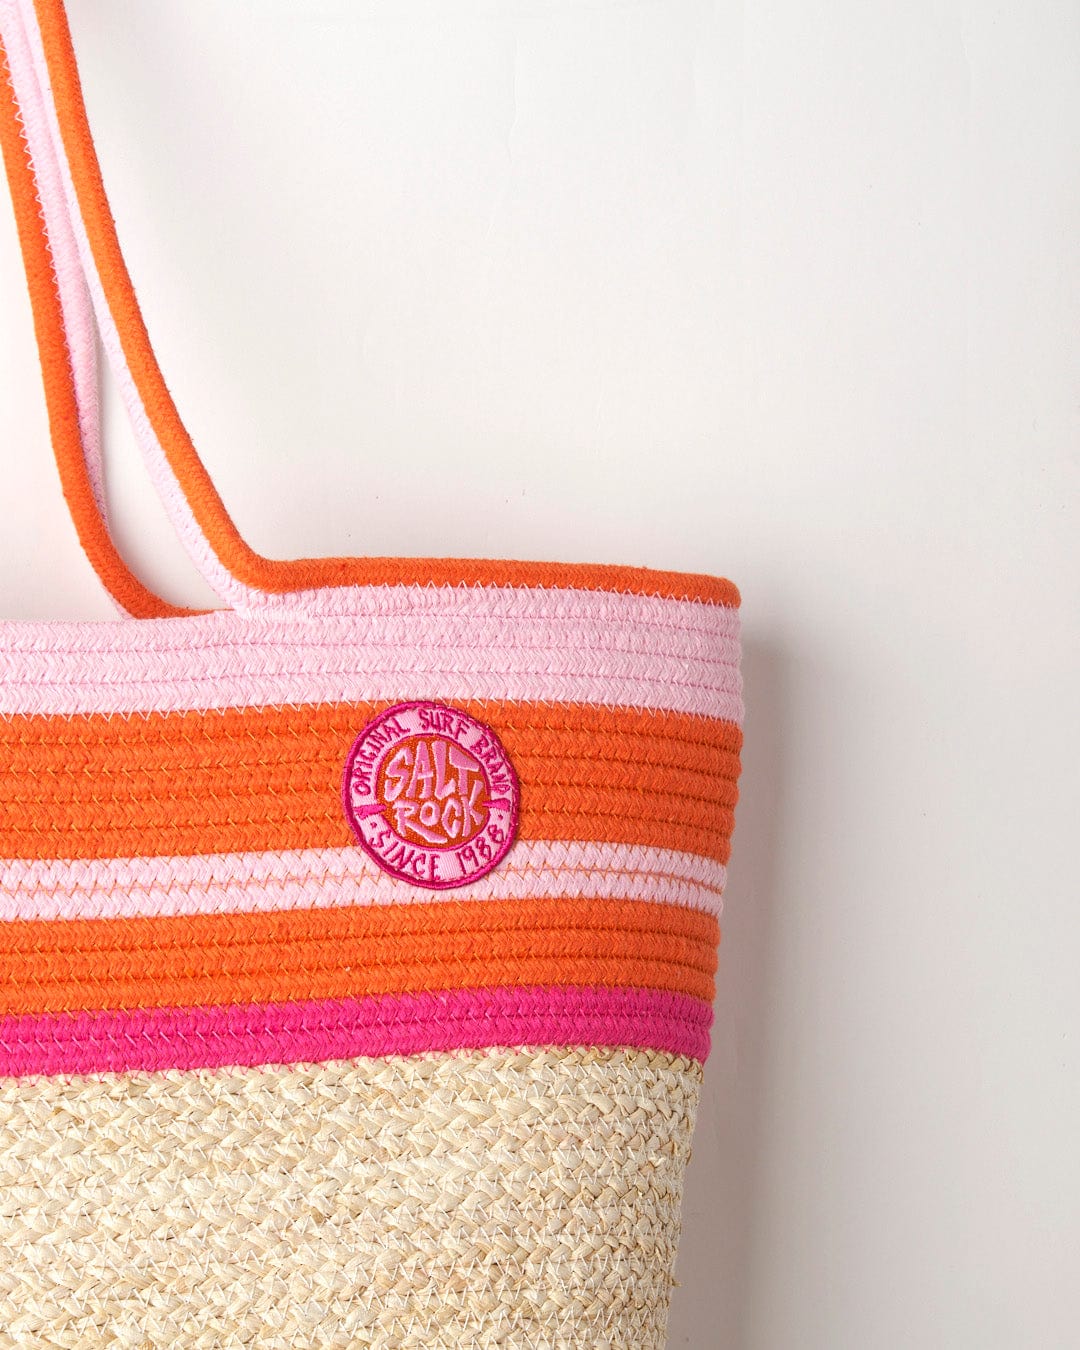 Striped Las Cora Straw Beach Bag - Cream with a pink logo patch on a white background and straw bottom by Saltrock.